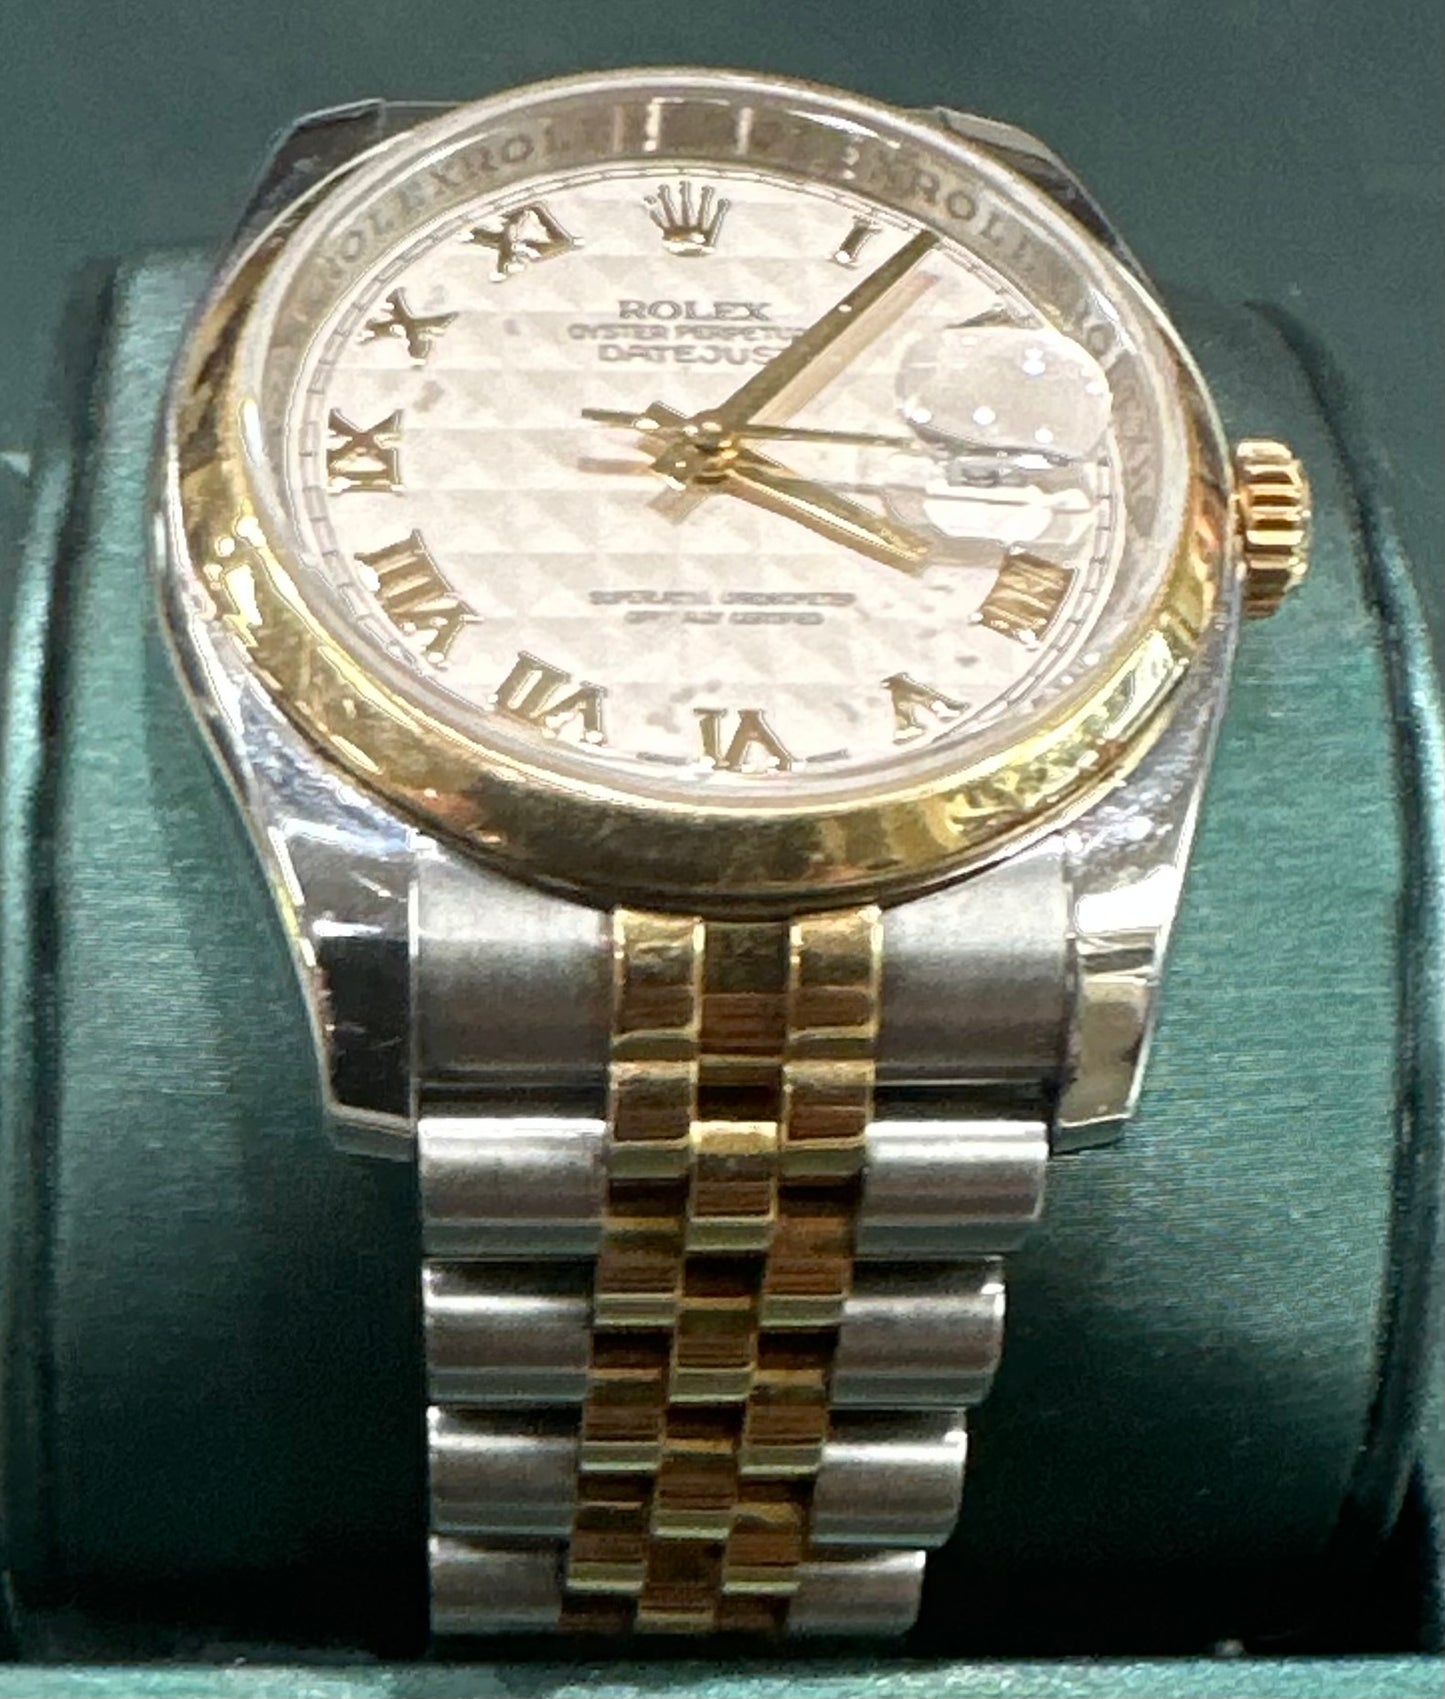 Rolex Datejust 36mm two tone